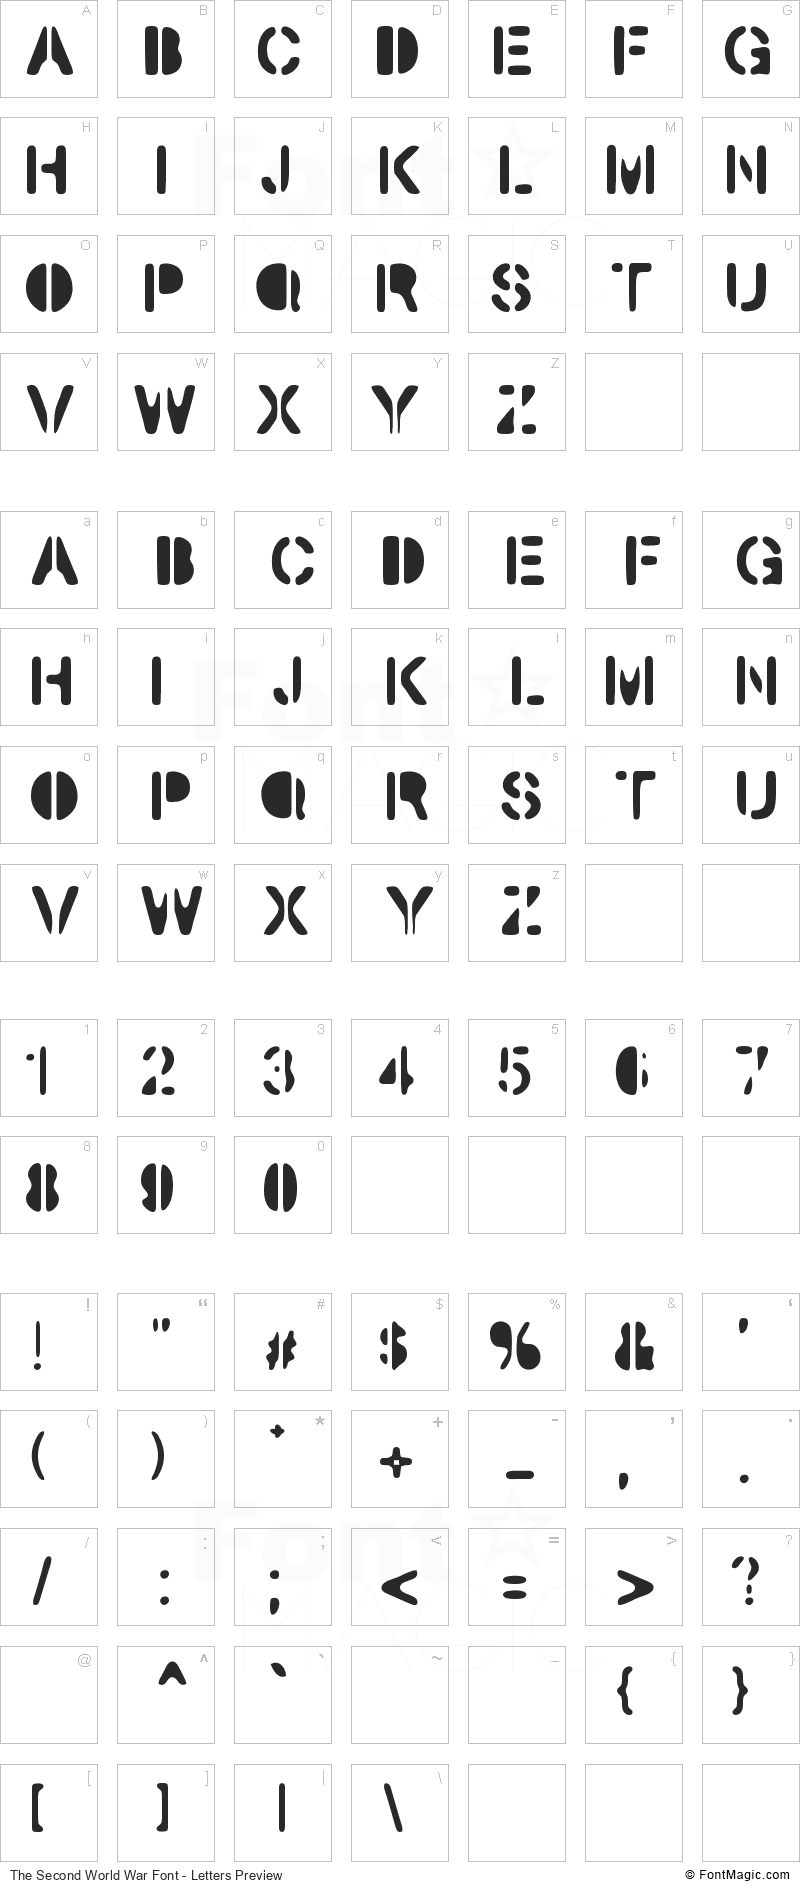 The Second World War Font - All Latters Preview Chart